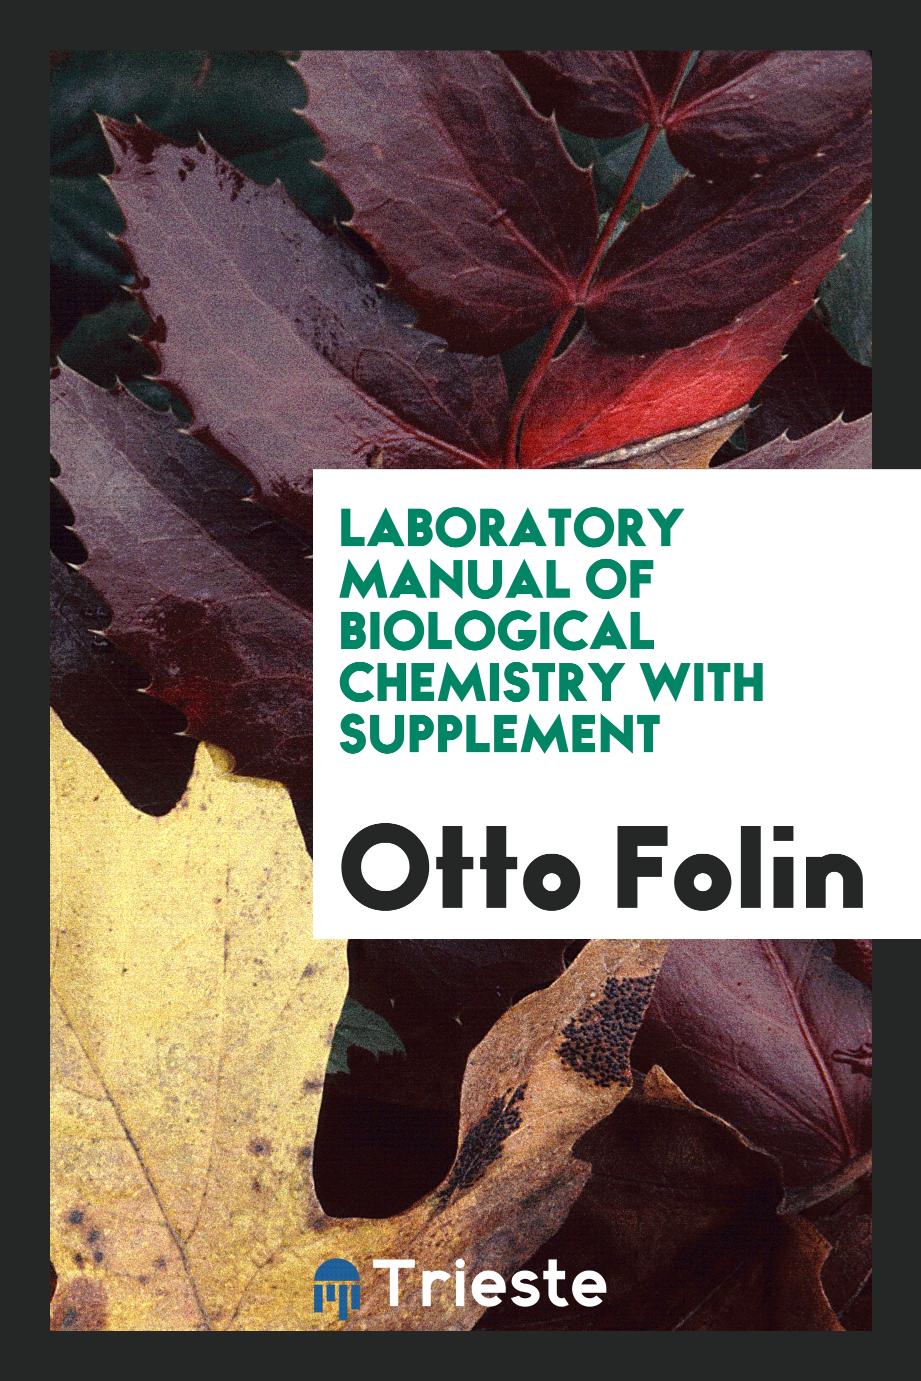 Laboratory Manual of Biological Chemistry with Supplement